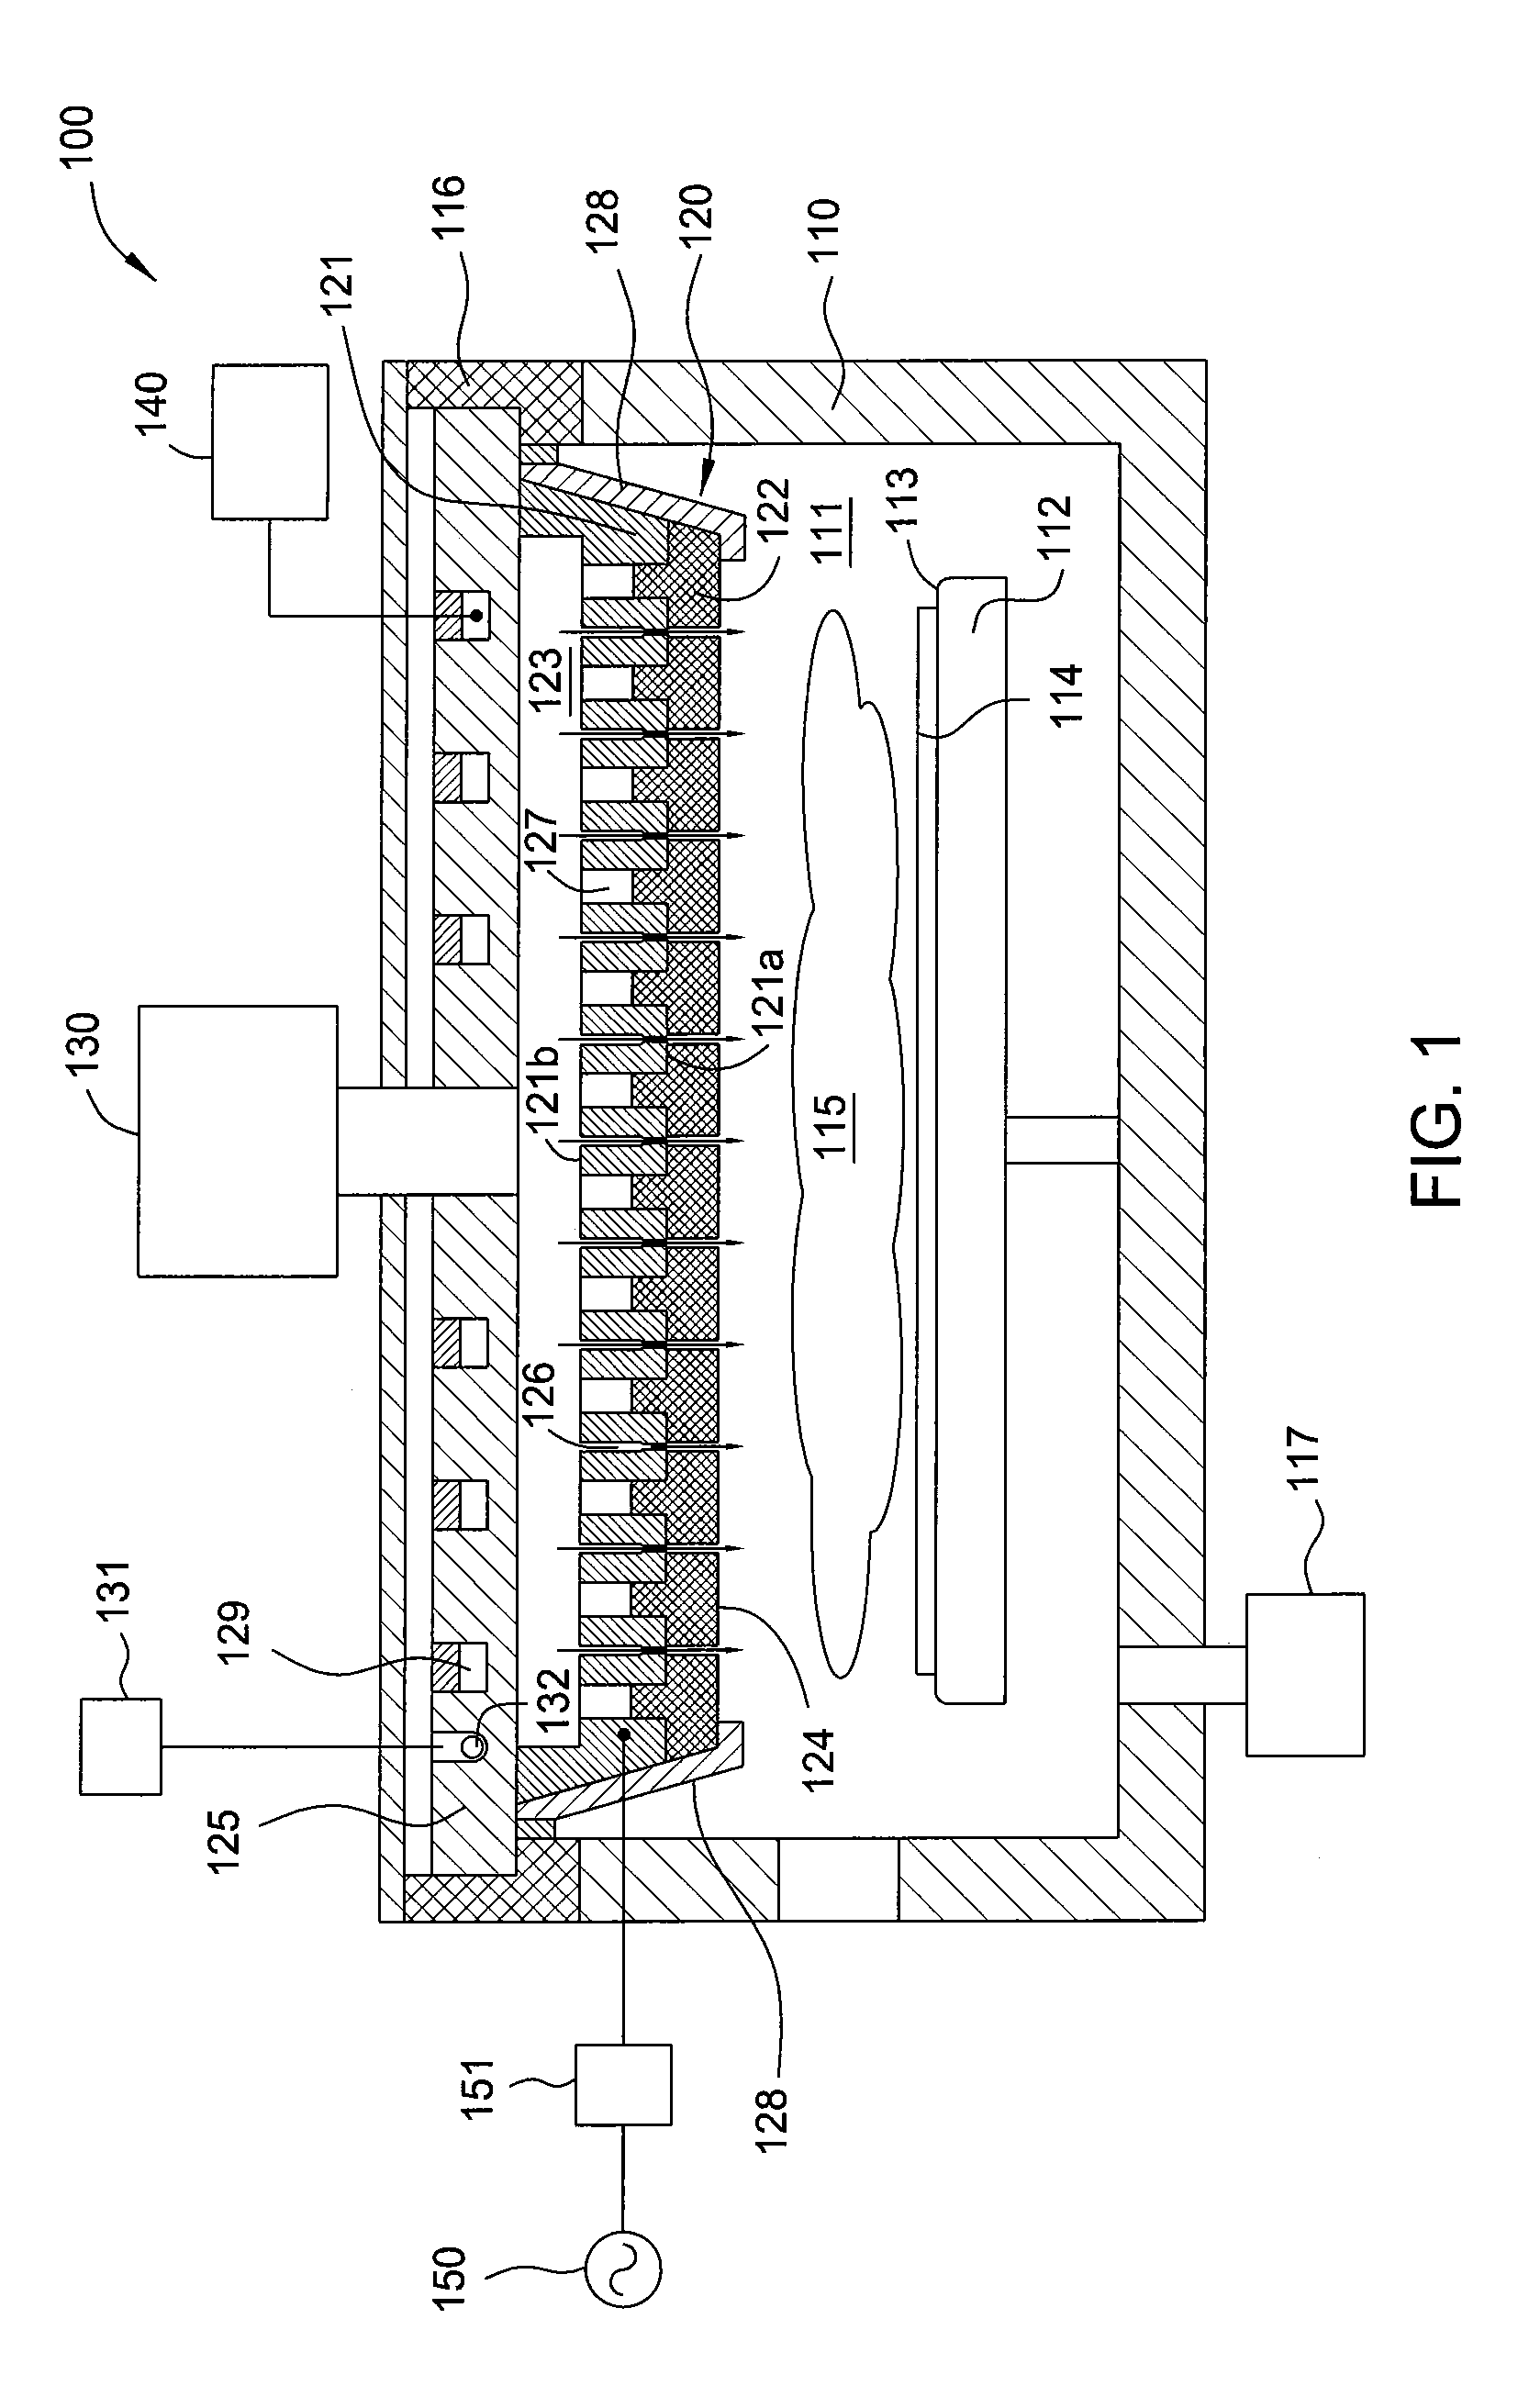 Gas distribution plate with discrete protective elements